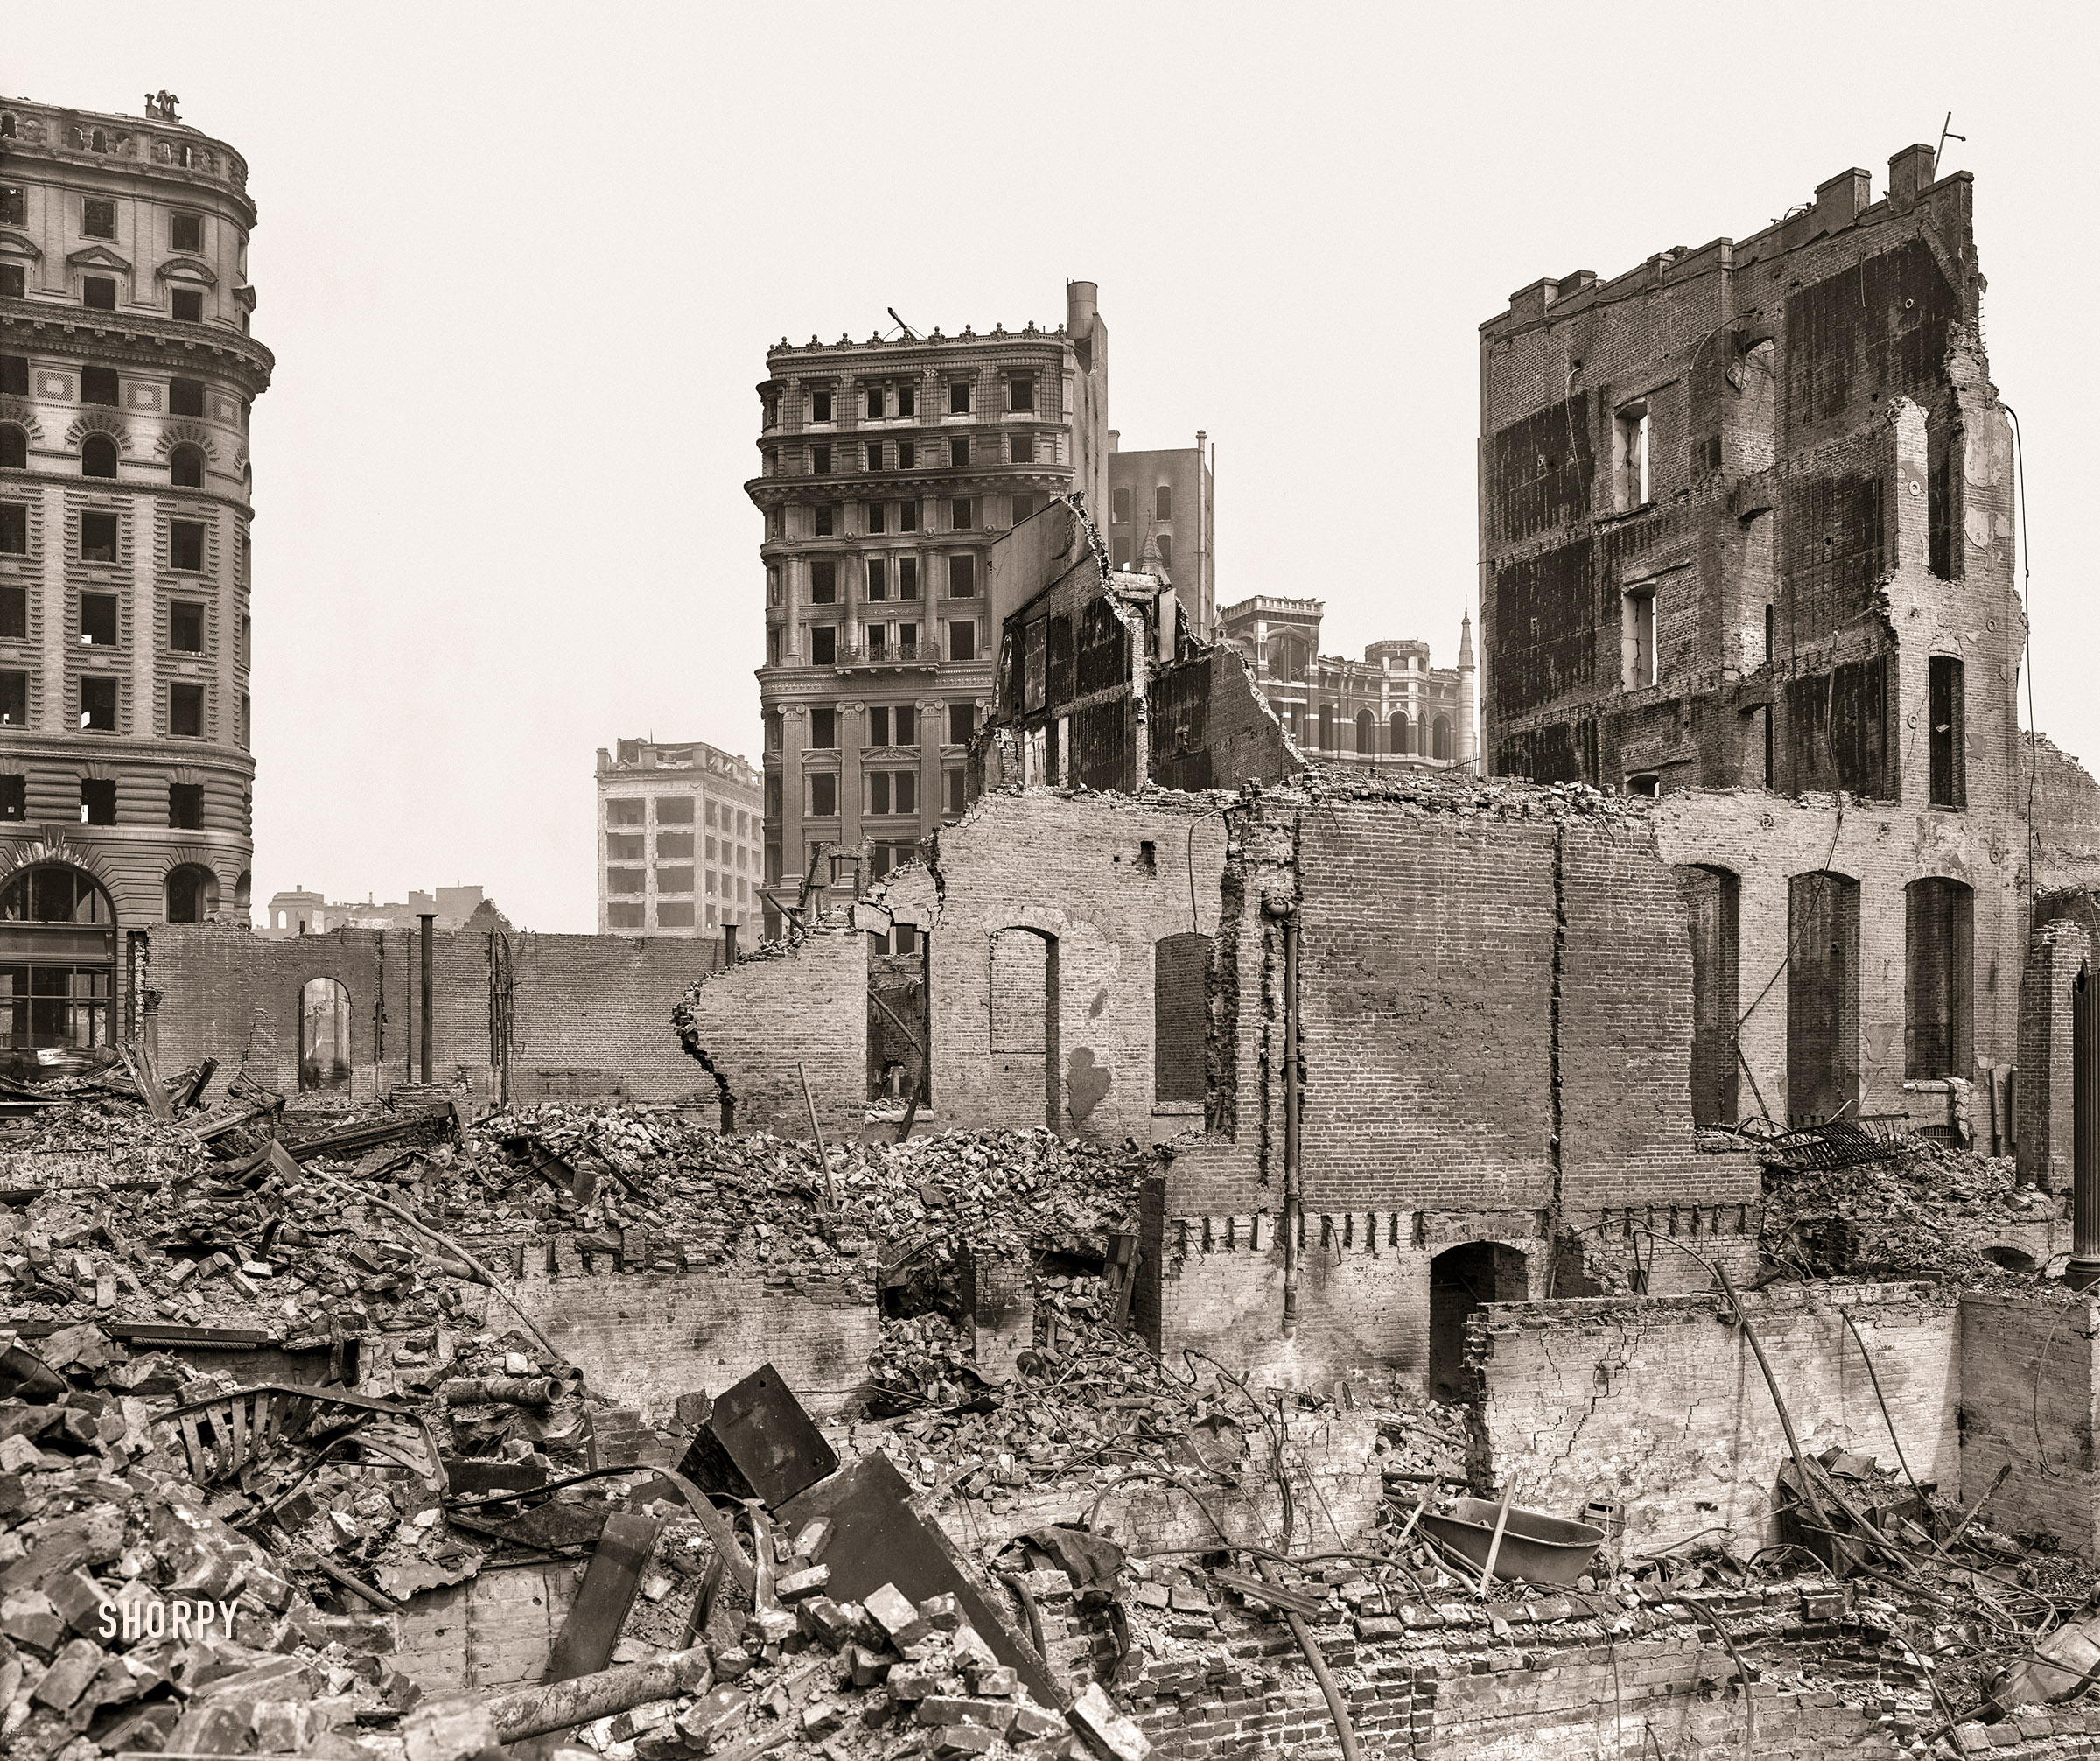 "Ruins of Pettibone Bros., New Montgomery Street." San Francisco in the aftermath of the earthquake and fire of April 18, 1906. 8x10 inch glass negative. View full size.